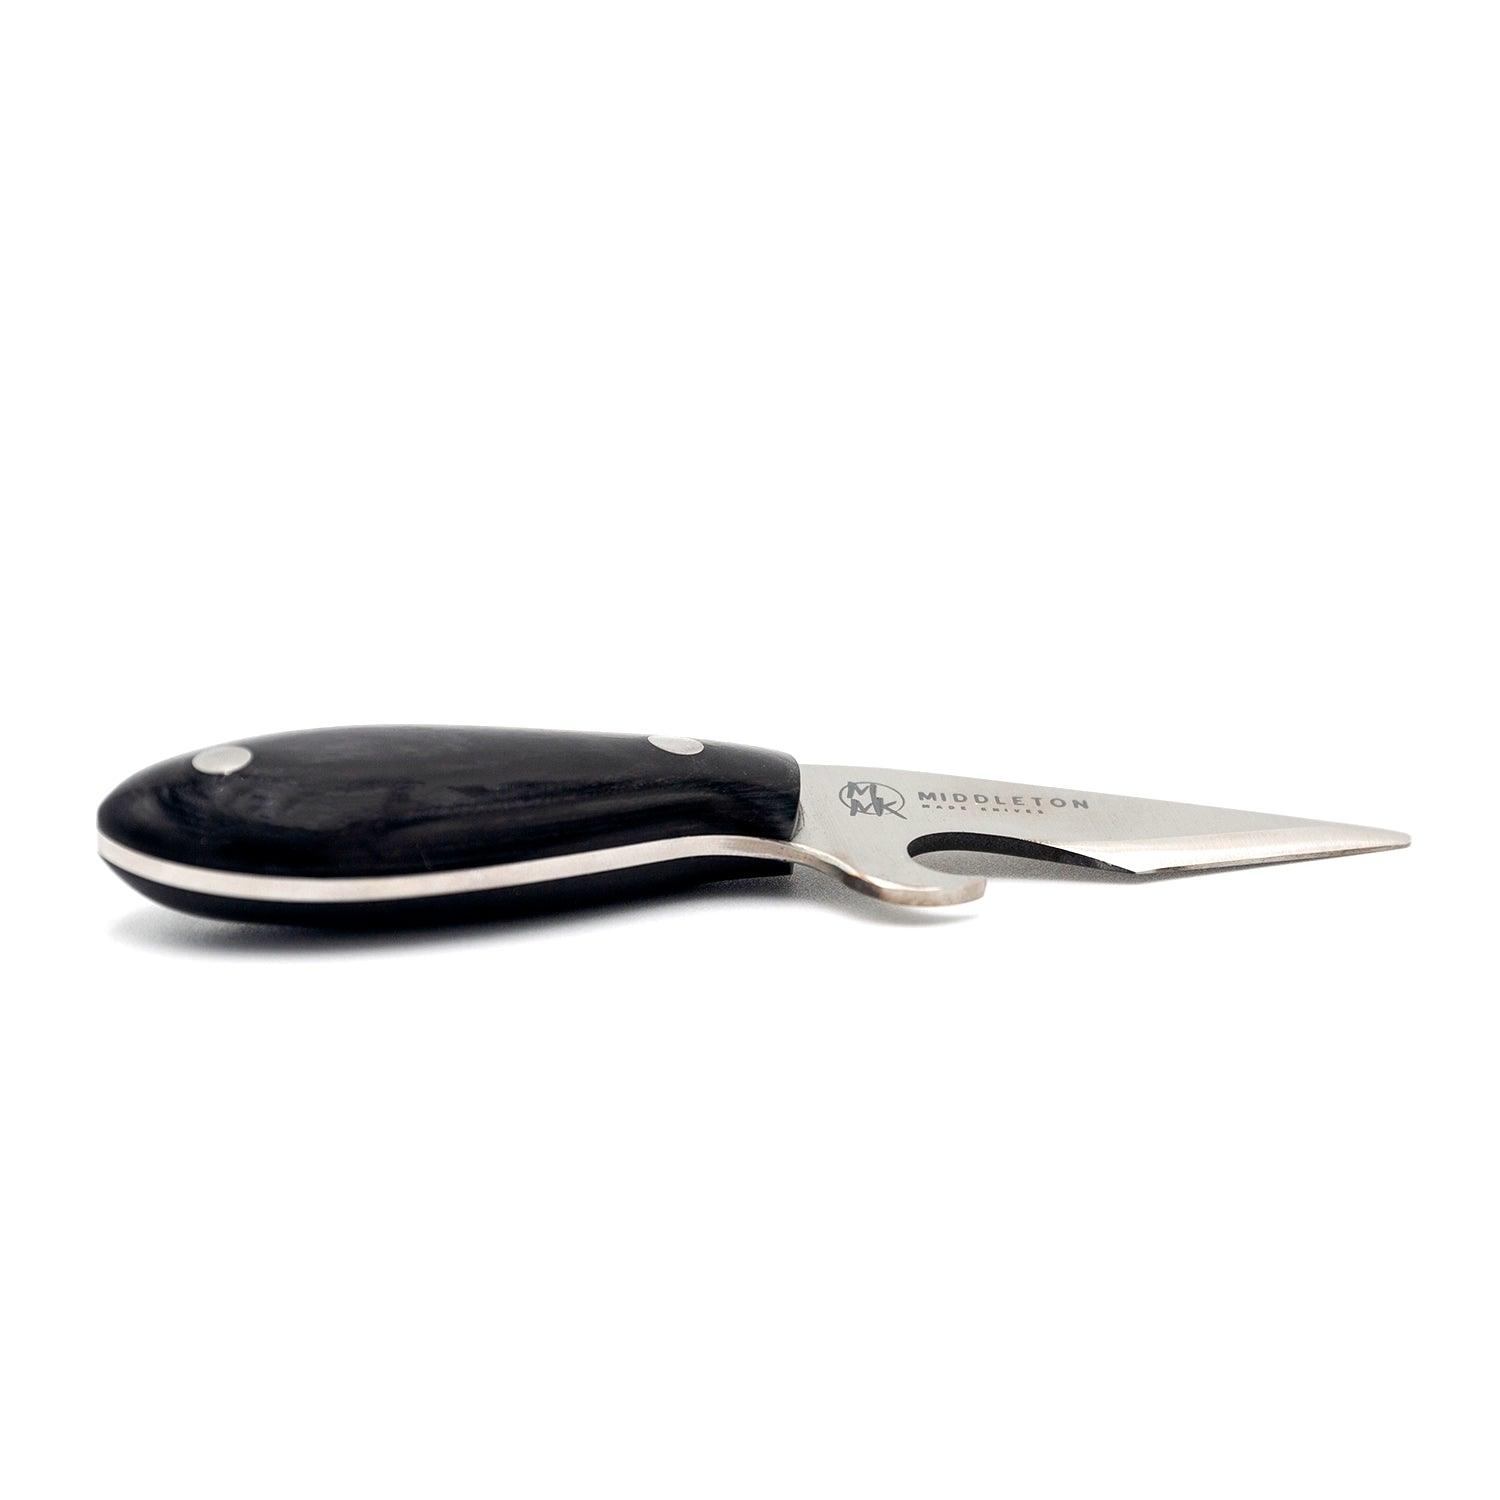 Brew Oyster Shucker - Southern Crafted